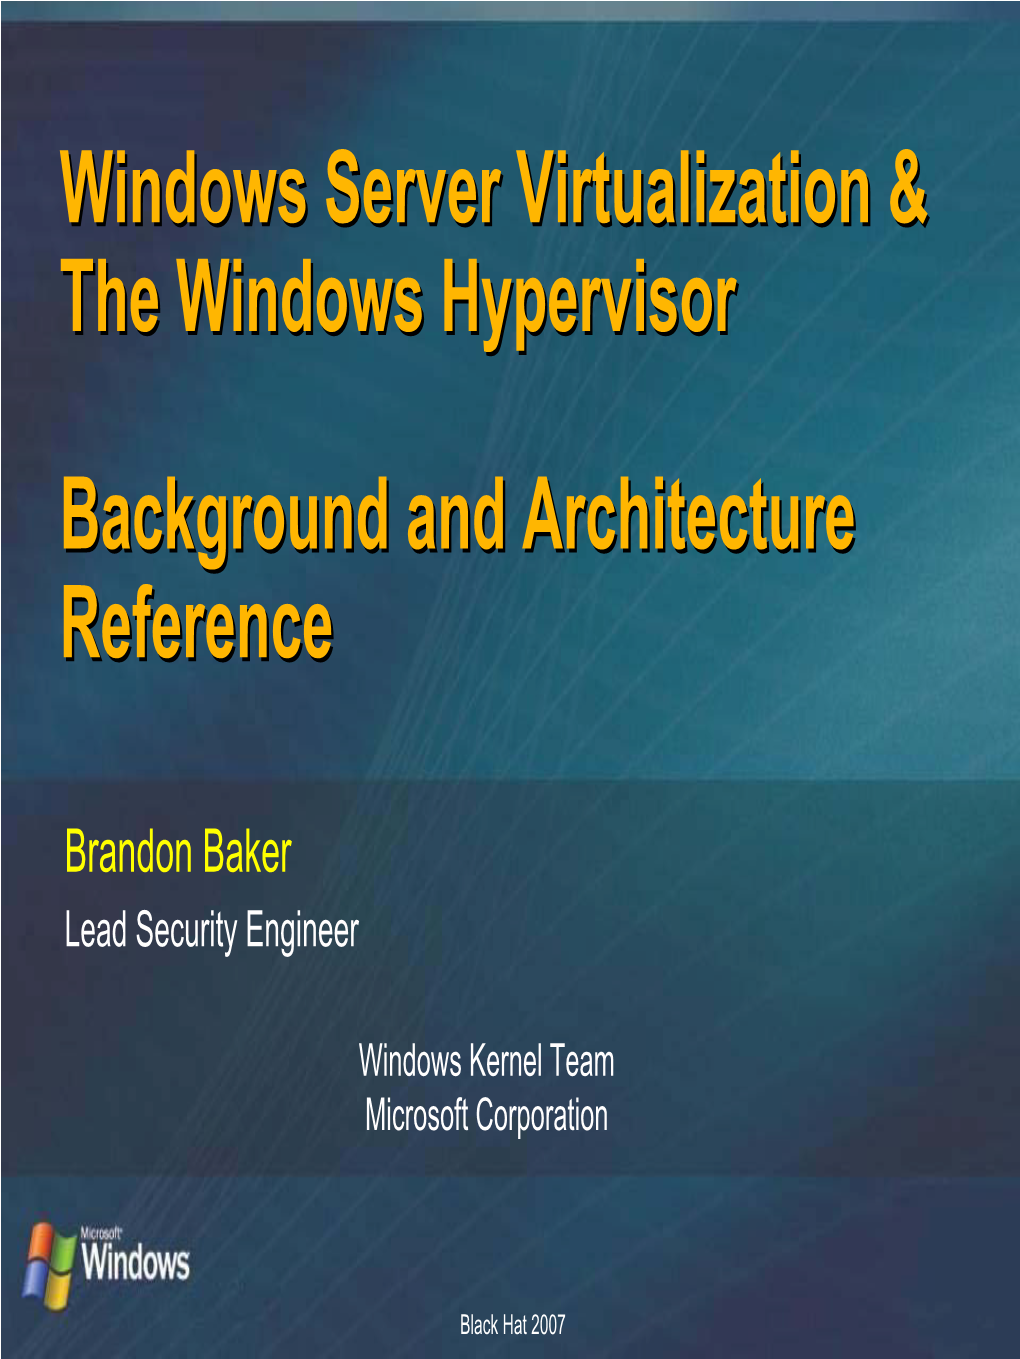 The Windows Hypervisor Background and Architecture Reference